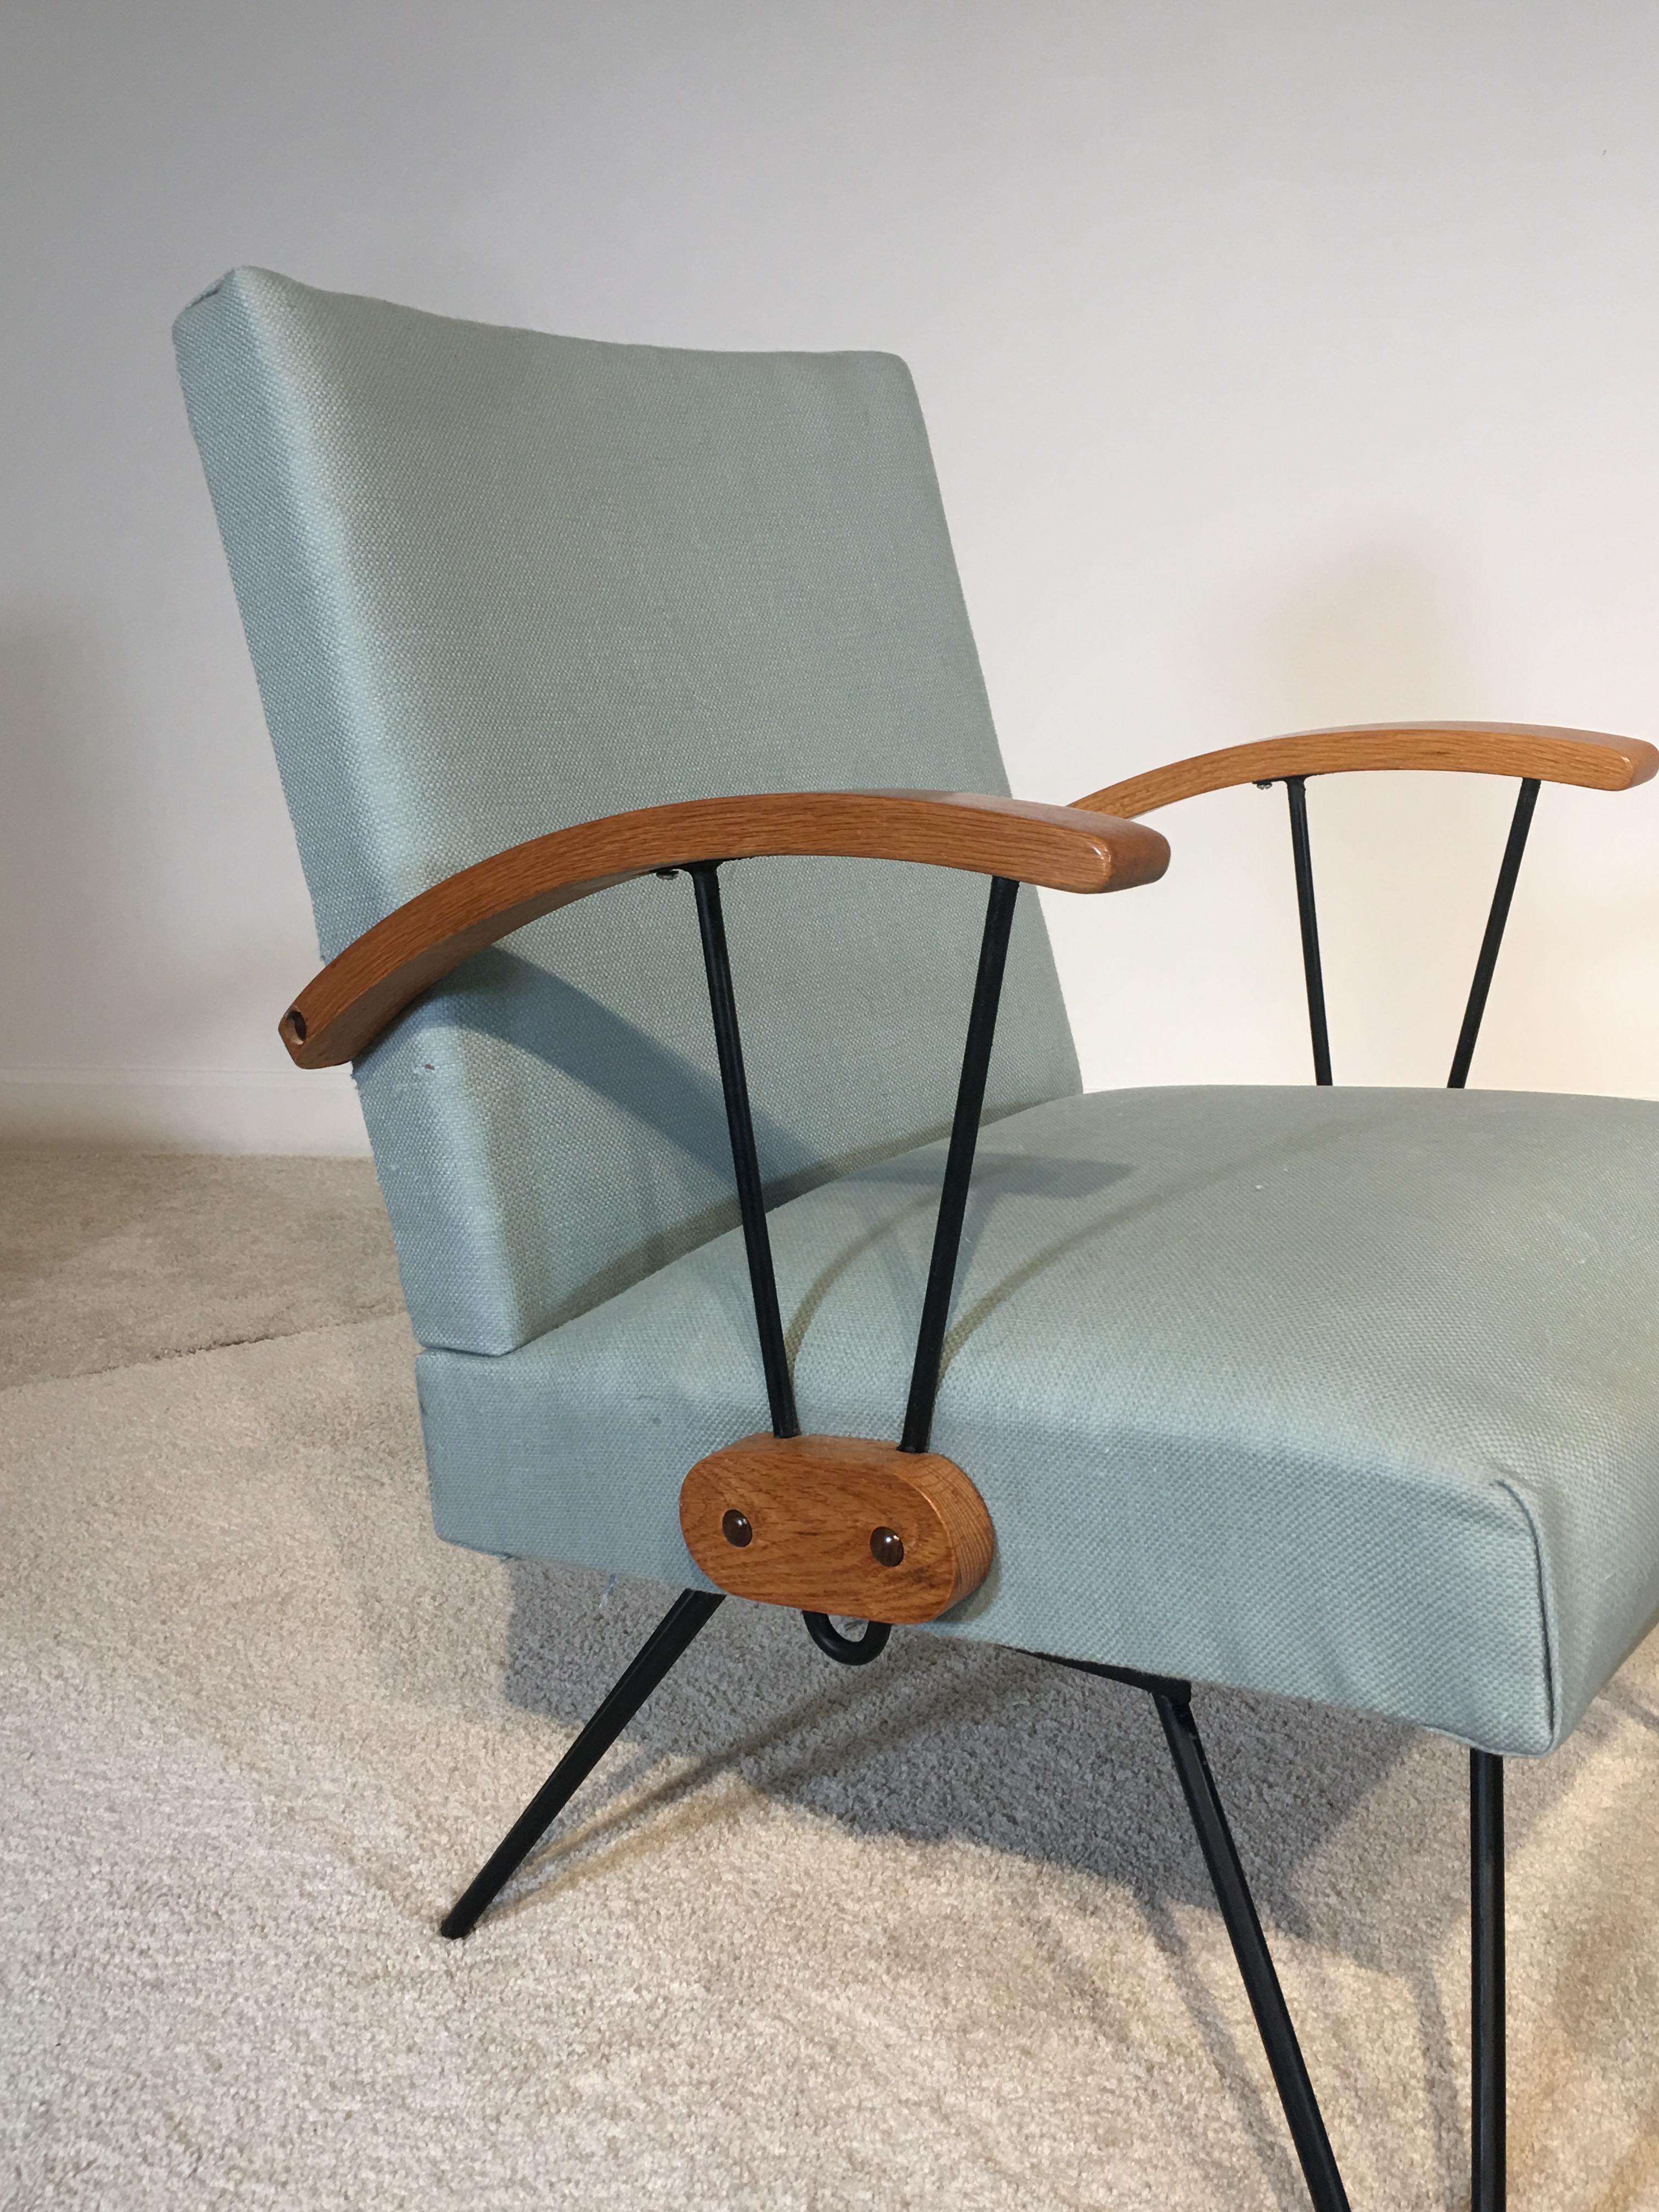 Simple and elegant rocking chair with ottoman in the style of Paul McCobb or Clifford Pascoe, circa 1940-1955. Features teal upholstery performed recently with the iron also recently painted. The arms are solid block wood, appears to be quarter sawn